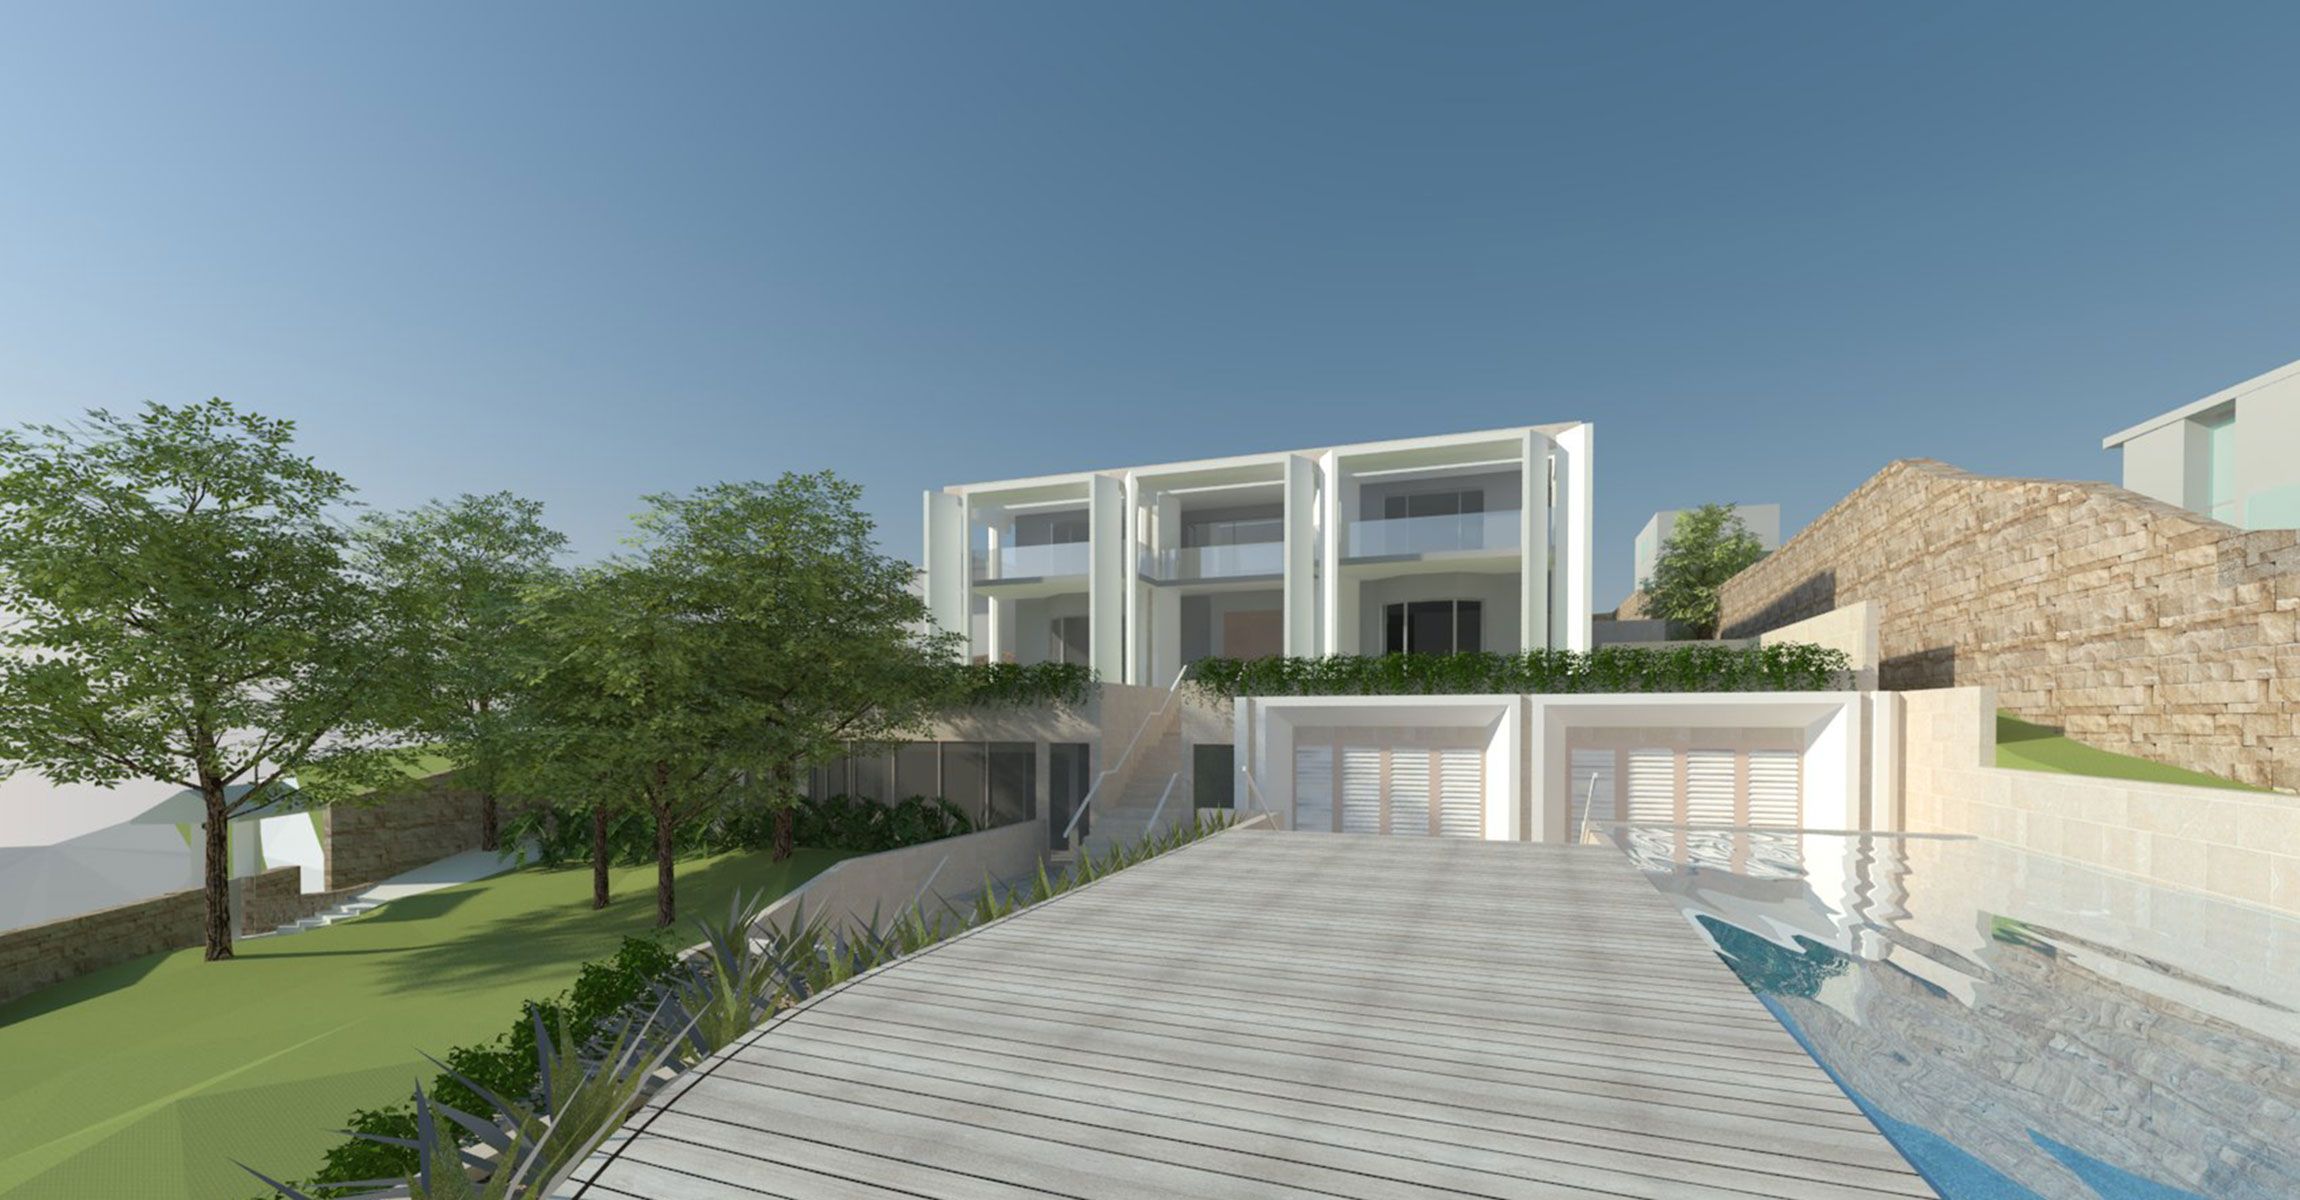 Vaucluse Residence web 1200h - 4